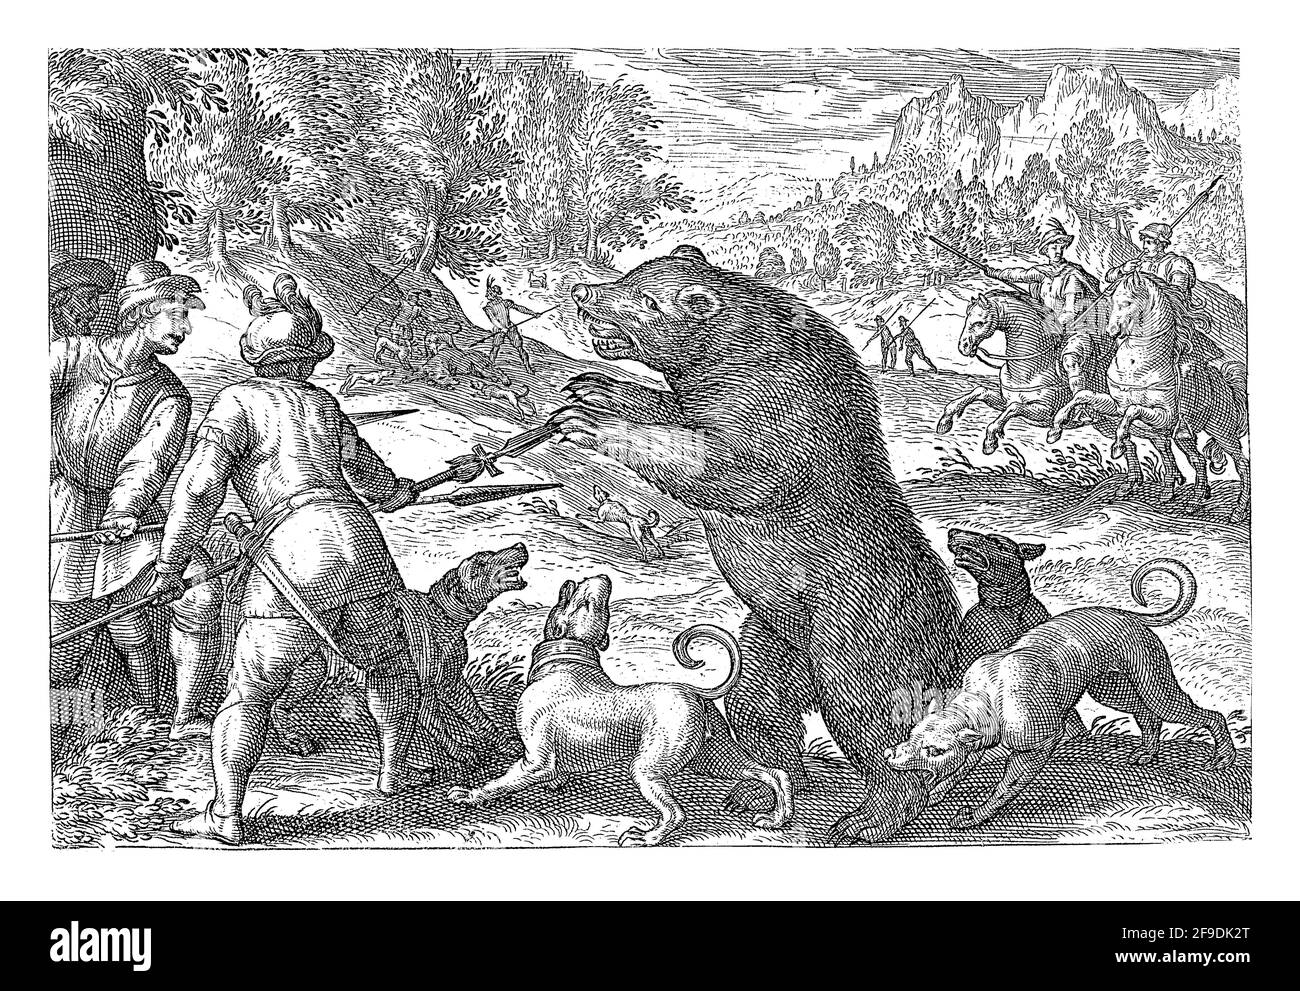 Landscape with three hunters and four dogs in the foreground chasing a bear. One of the dogs bites the bear's paw. In the background to the right two Stock Photo